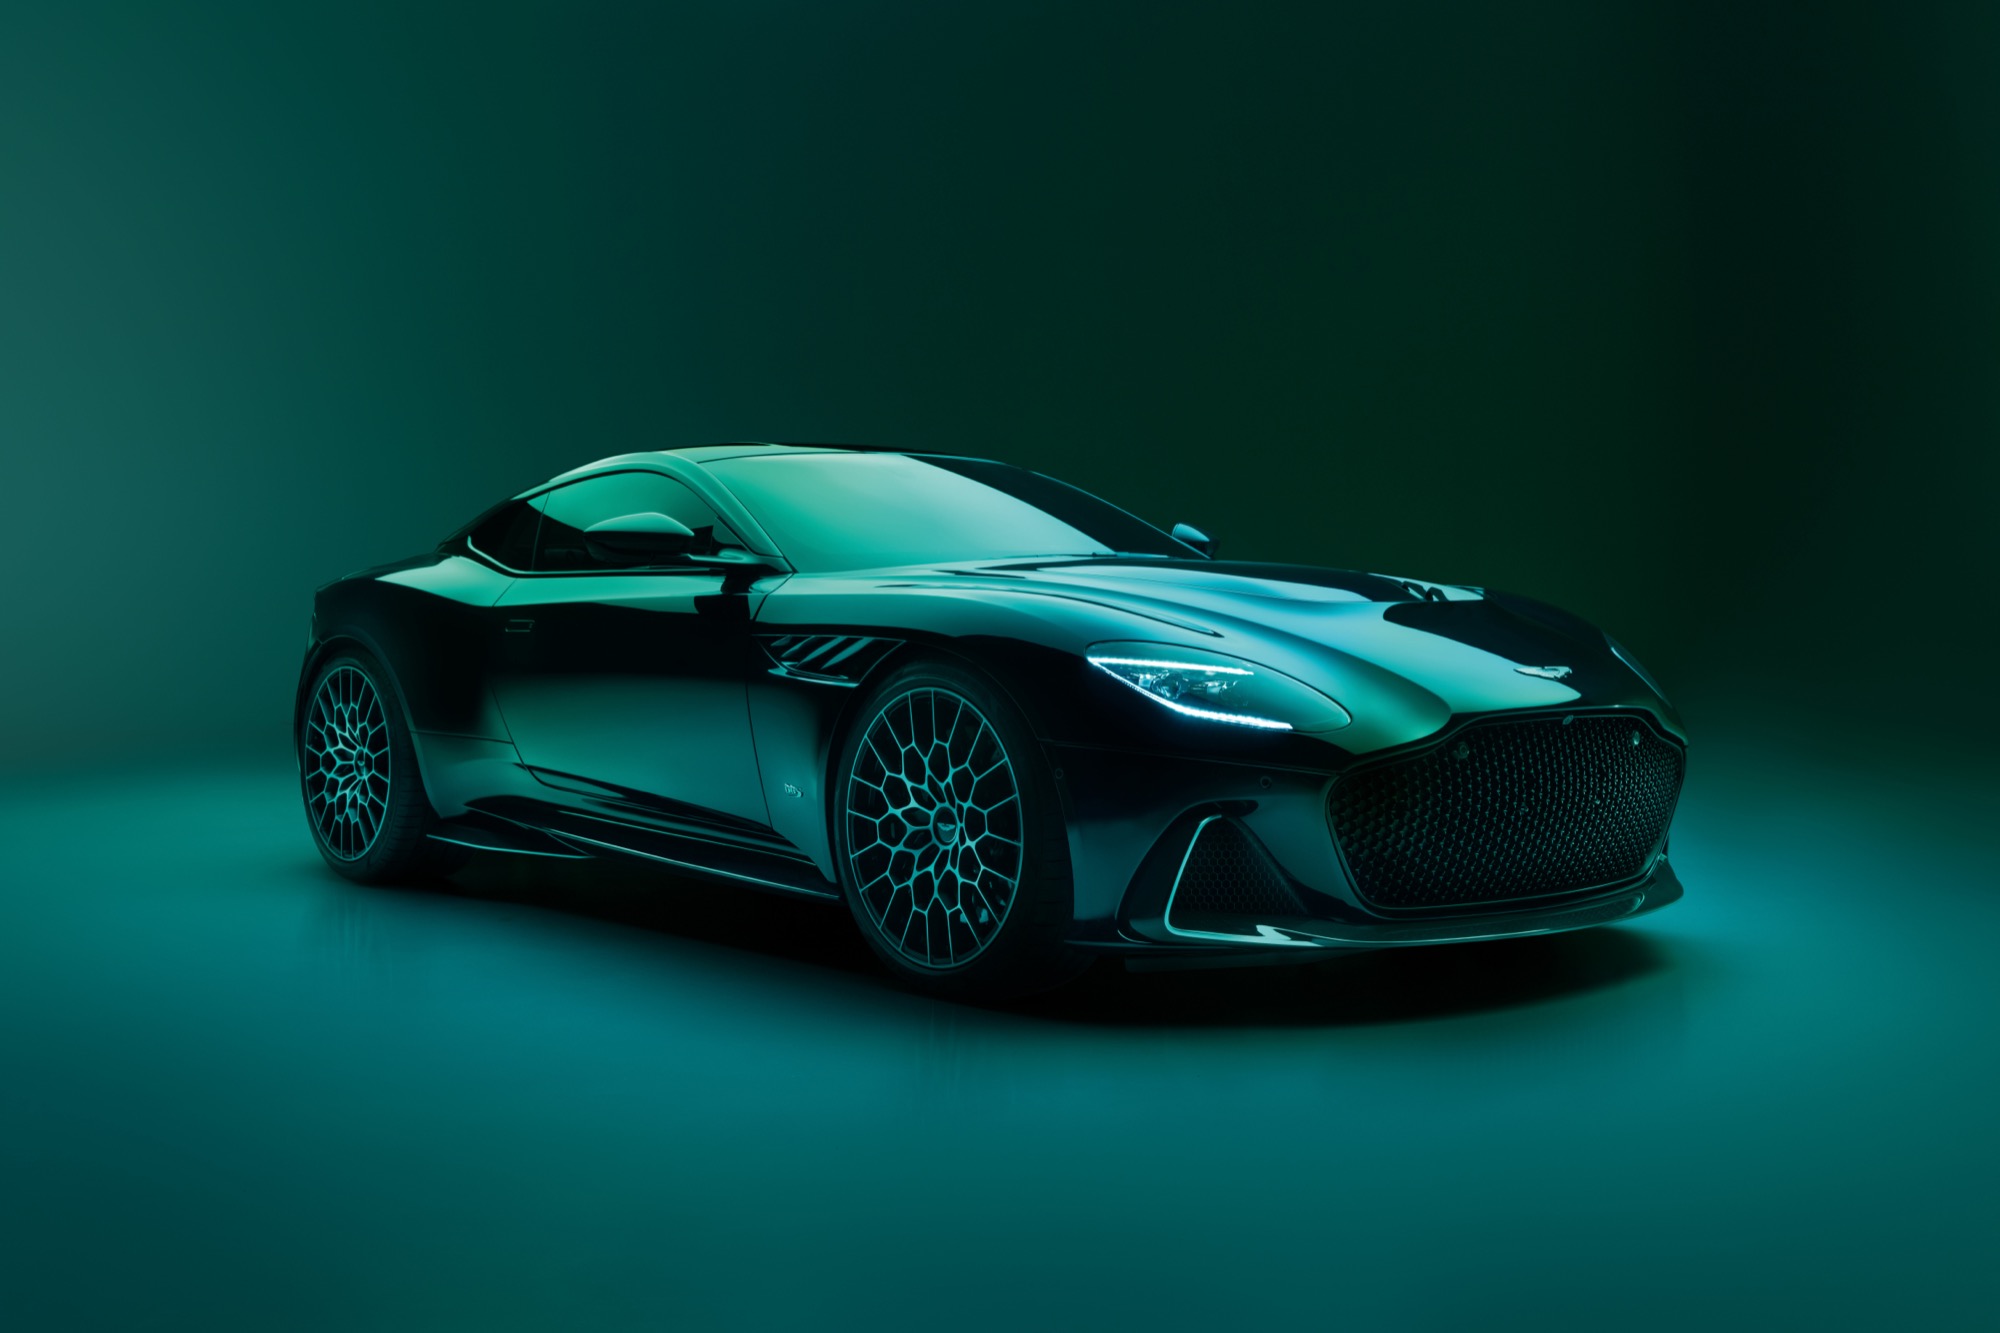 This is the Aston Martin DBS 770 Ultimate.  The most powerful production car to date.